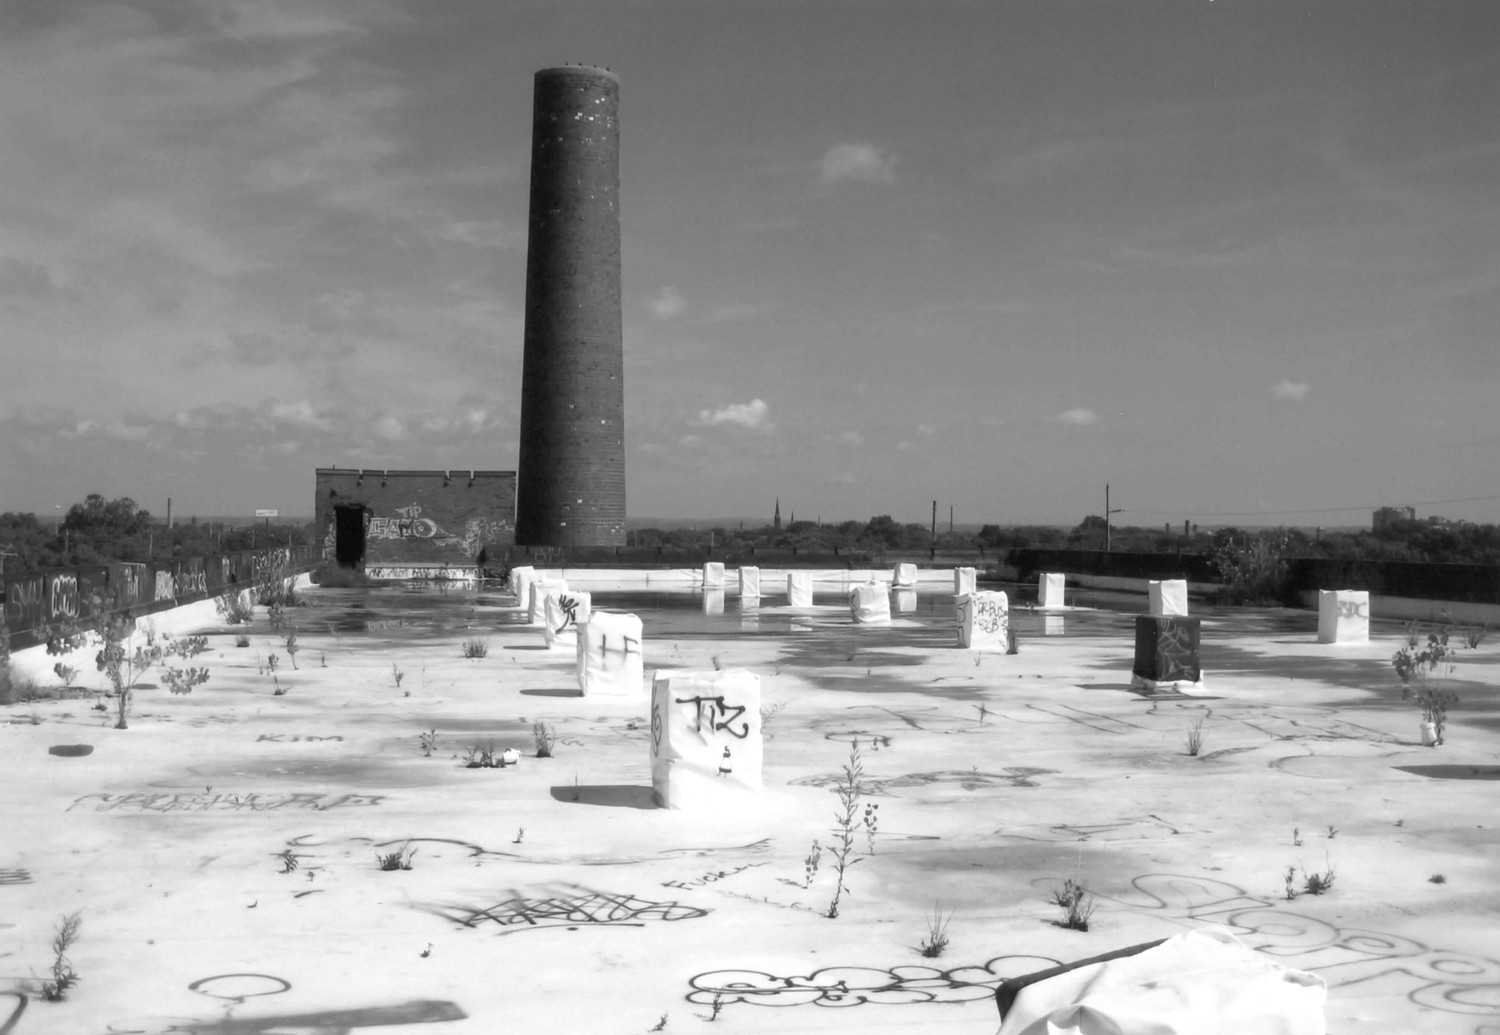 Joseph and Feiss Clothcraft Shops, Cleveland Ohio Warehouse building exterior, roof with brick pier bases, northeast tower and smokestack (2009)